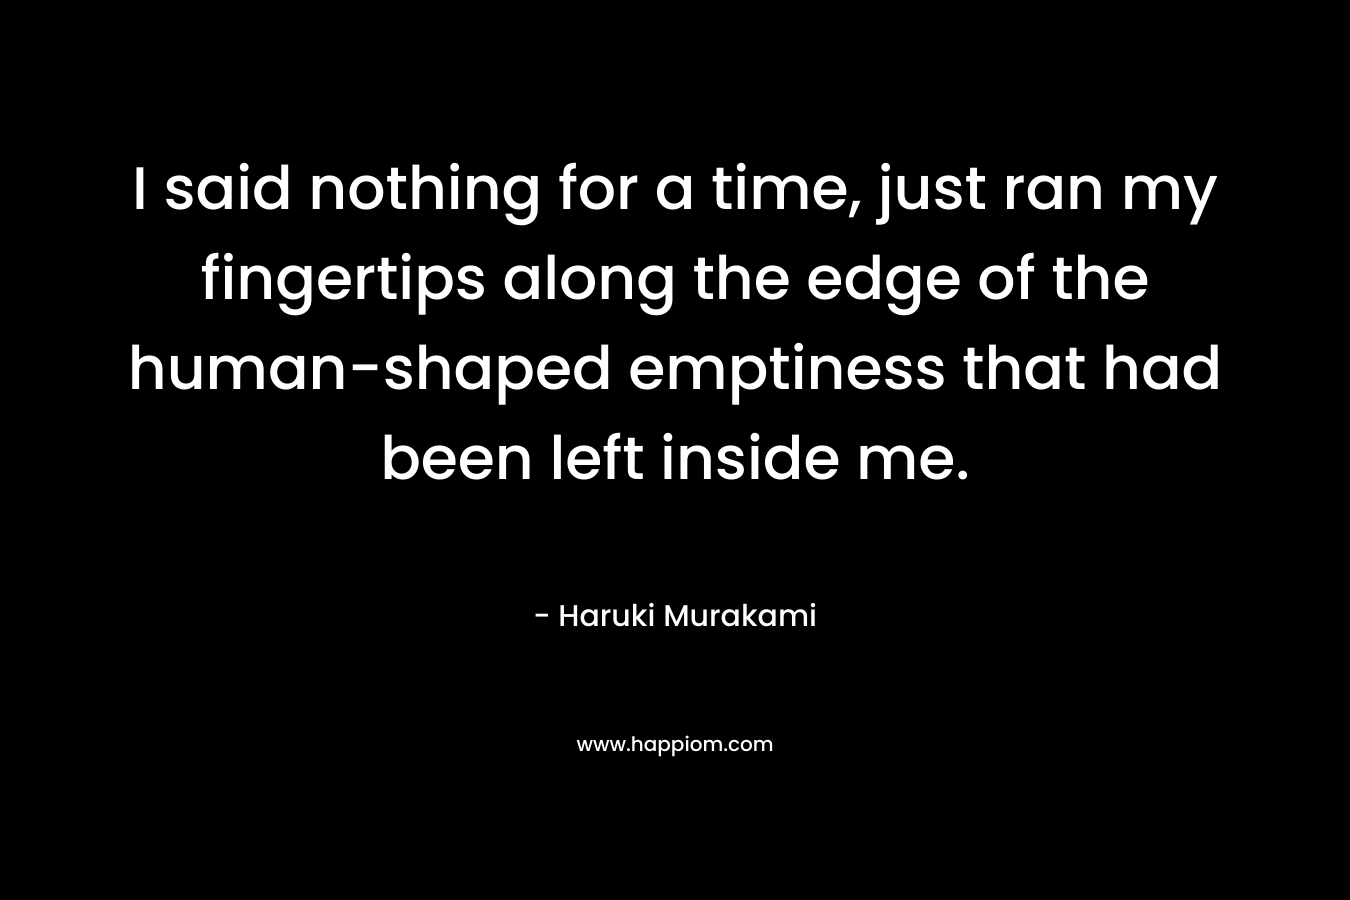 I said nothing for a time, just ran my fingertips along the edge of the human-shaped emptiness that had been left inside me. – Haruki Murakami